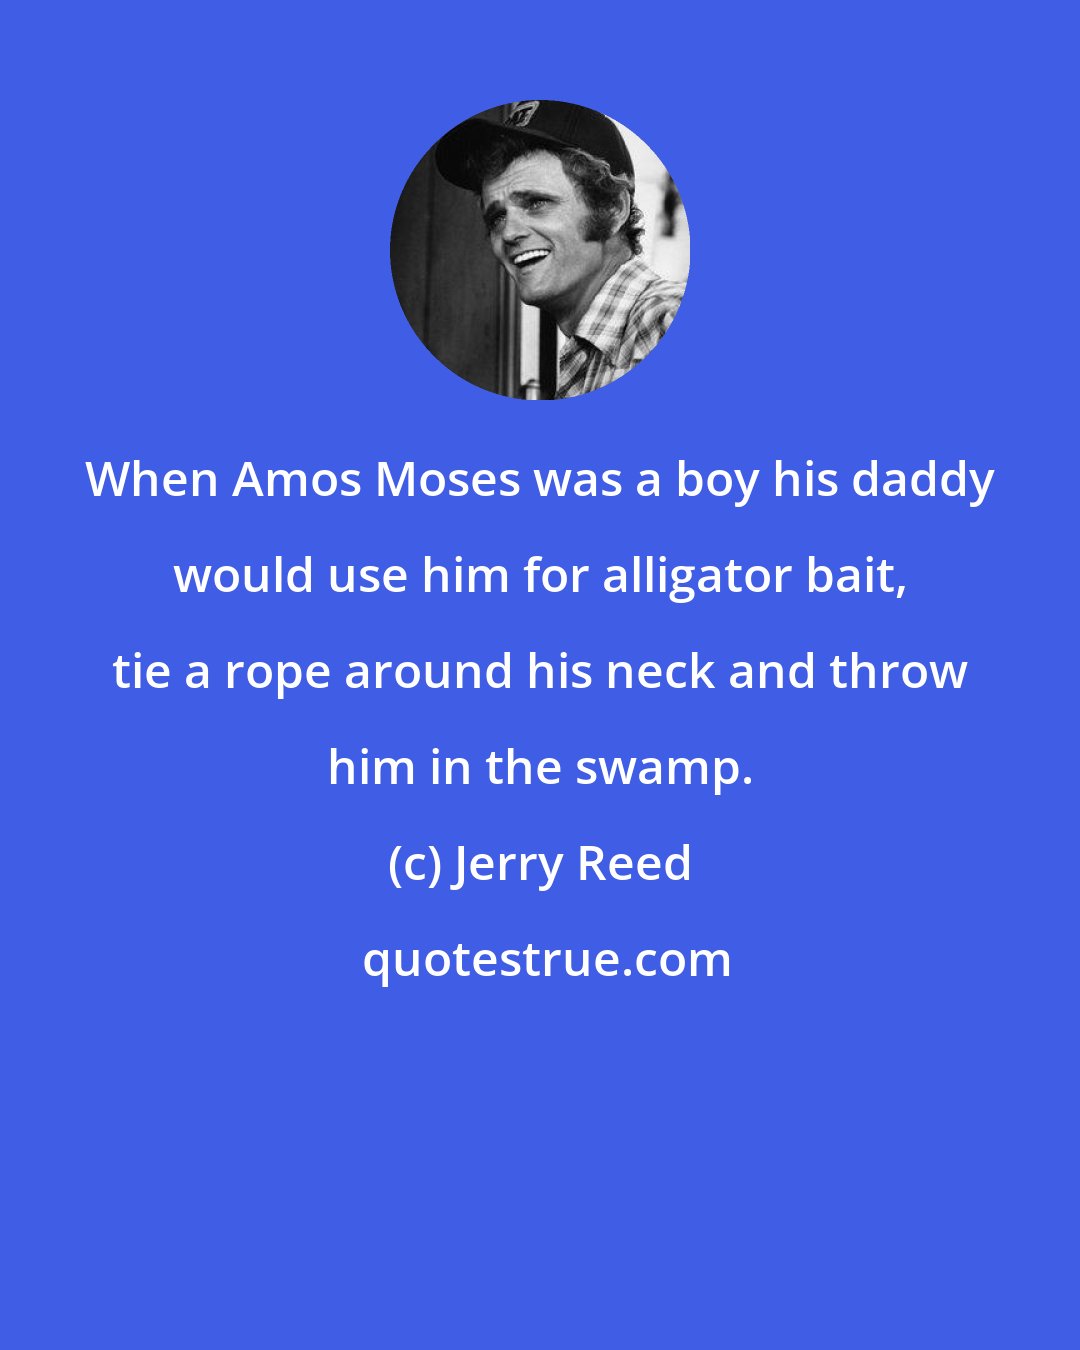 Jerry Reed: When Amos Moses was a boy his daddy would use him for alligator bait, tie a rope around his neck and throw him in the swamp.